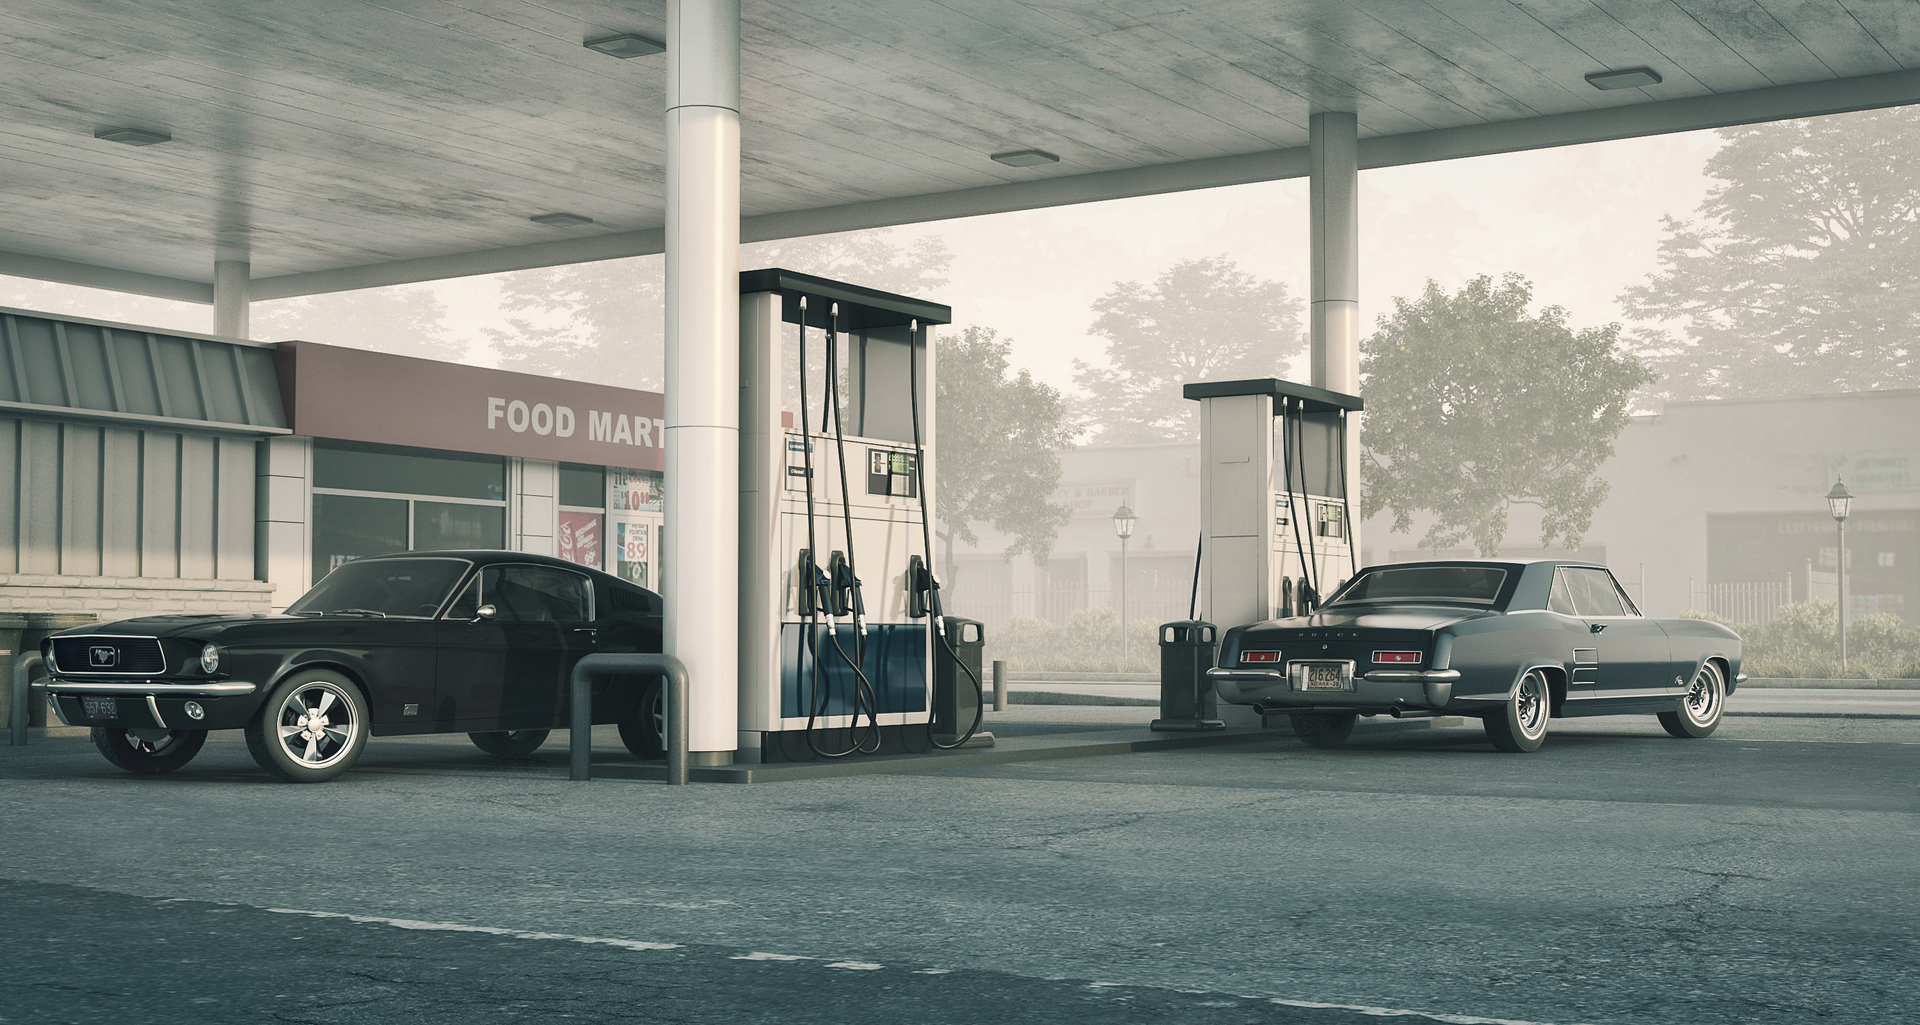 d photoshop ds max vray gas station mohamedraof